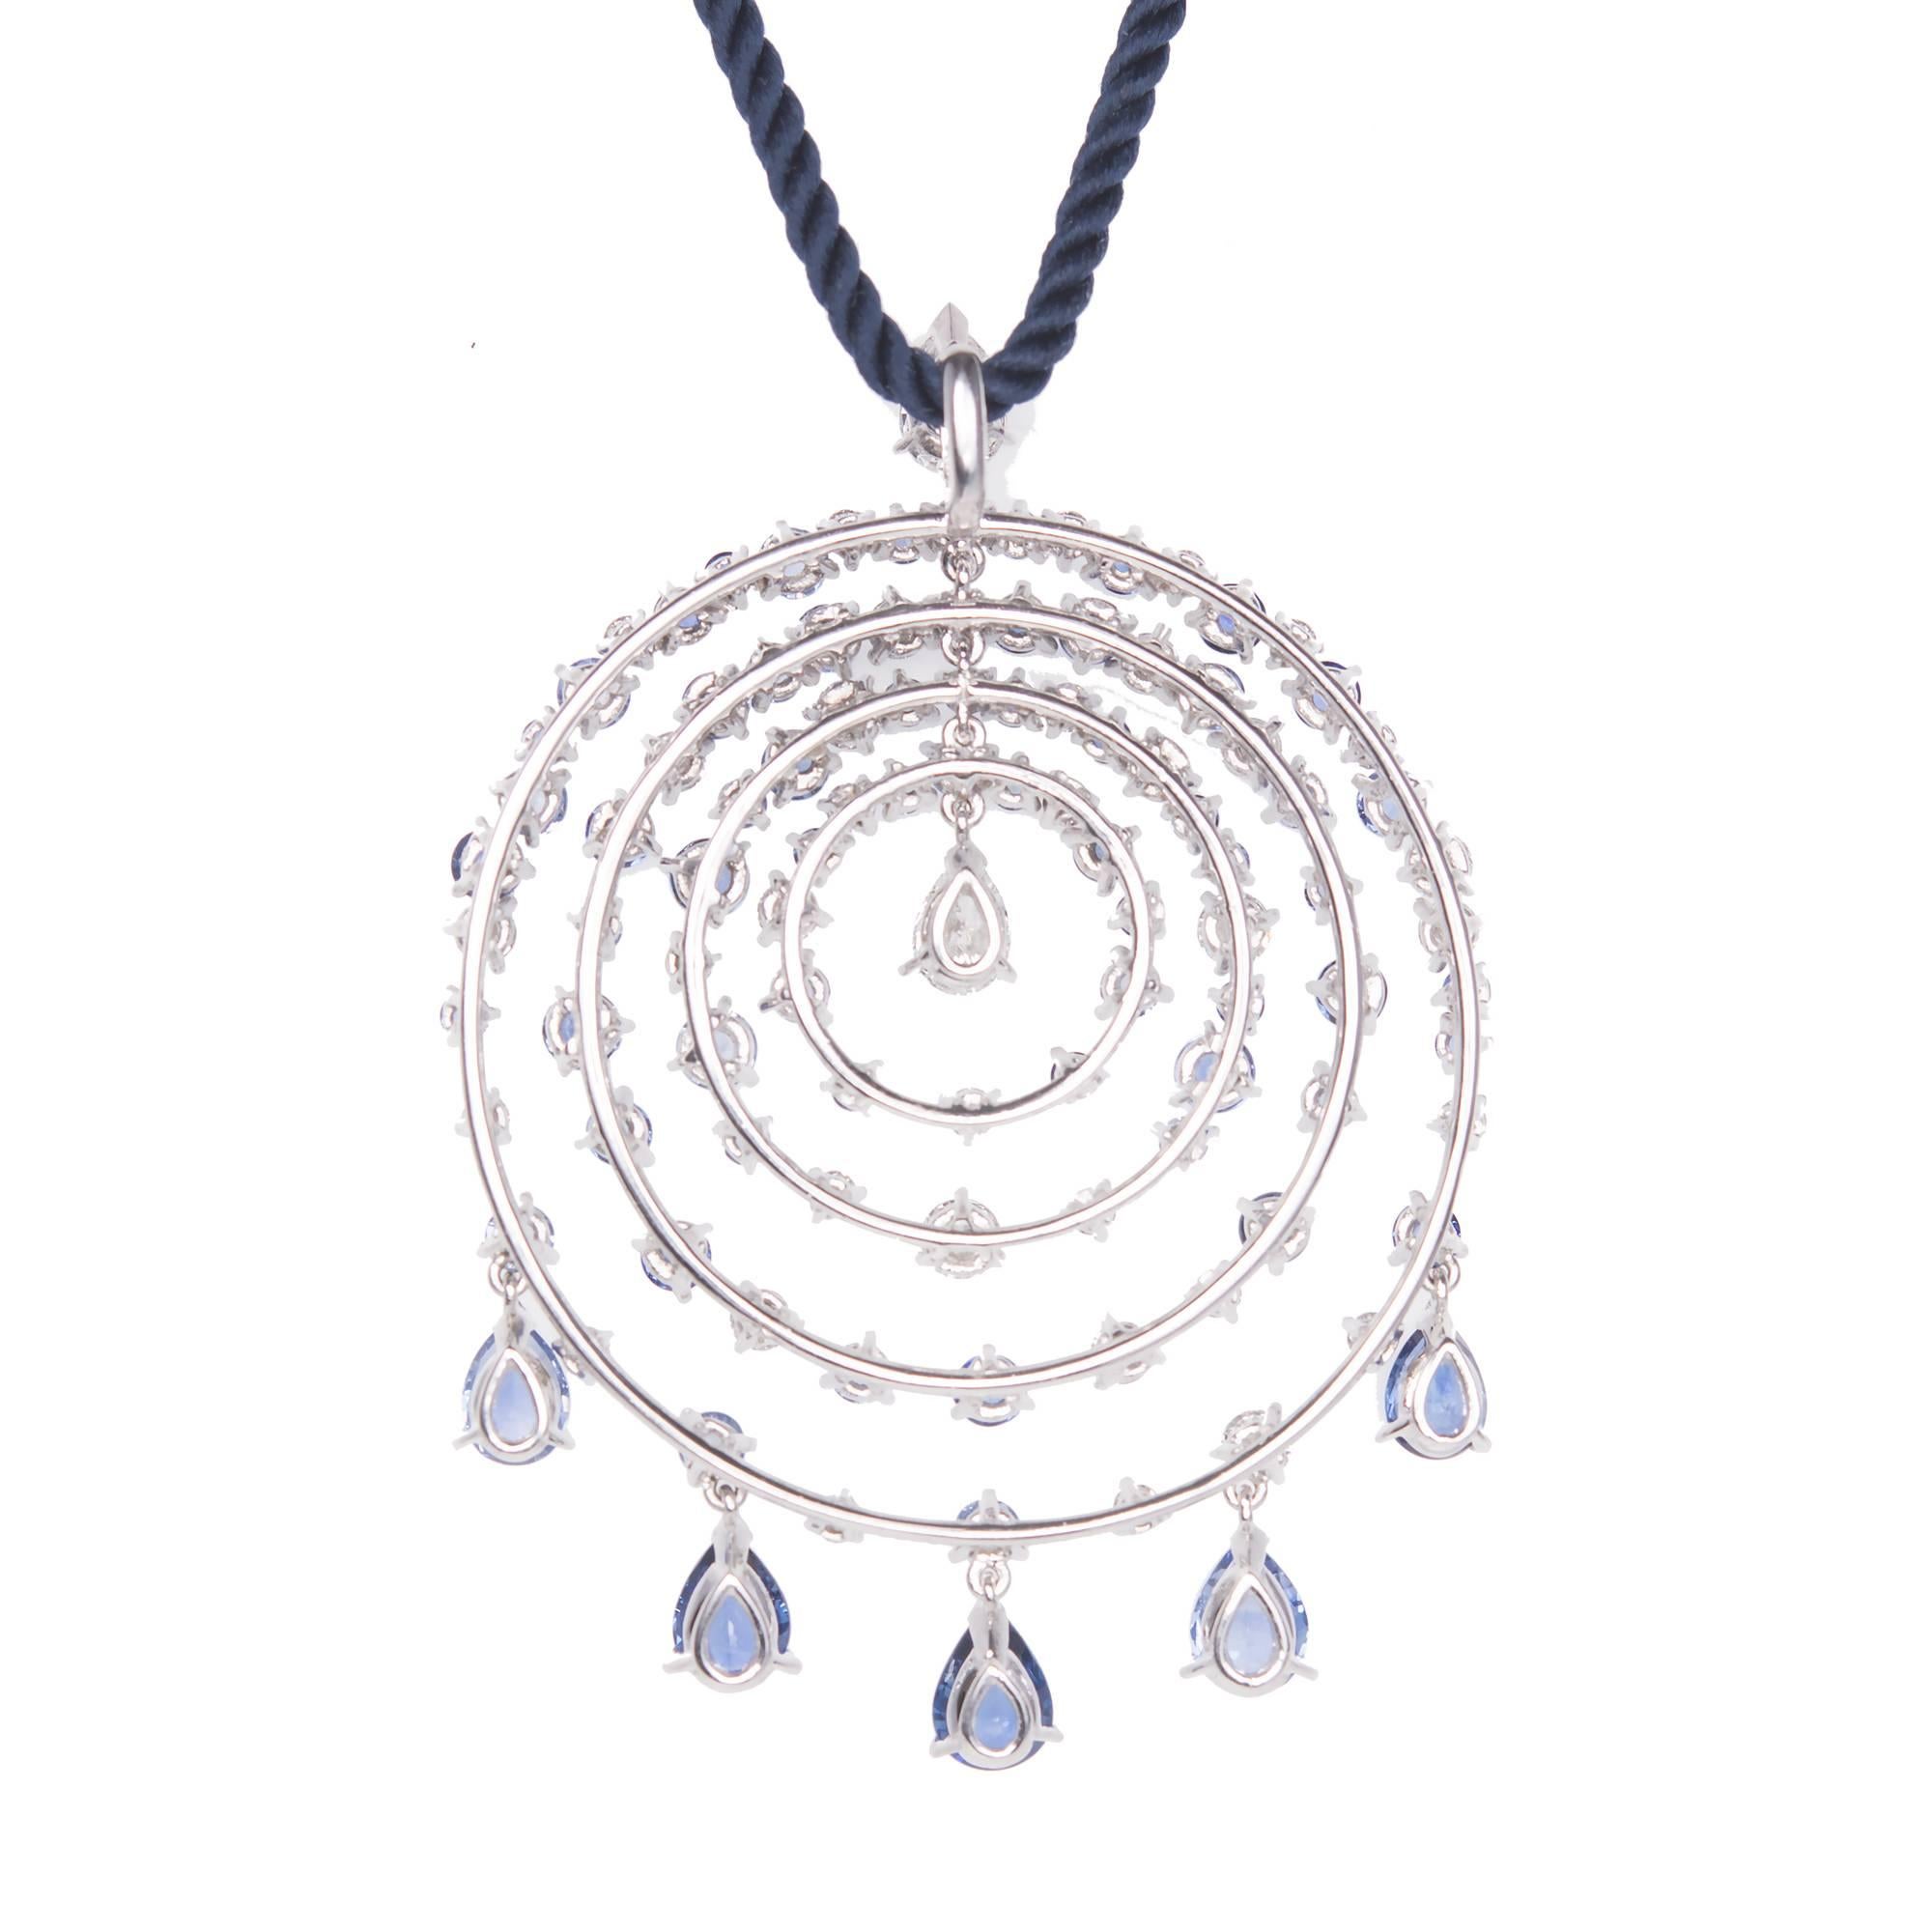 Van Cleef & Arpels Petillante 18k White Gold pear and round sapphire and diamond necklace pendant. Comes with a 15 inch long navy blue twisted silk  2mm necklace with an 18k catch. 

5 Pear shaped gem blue sapphires VS approximately 2.00